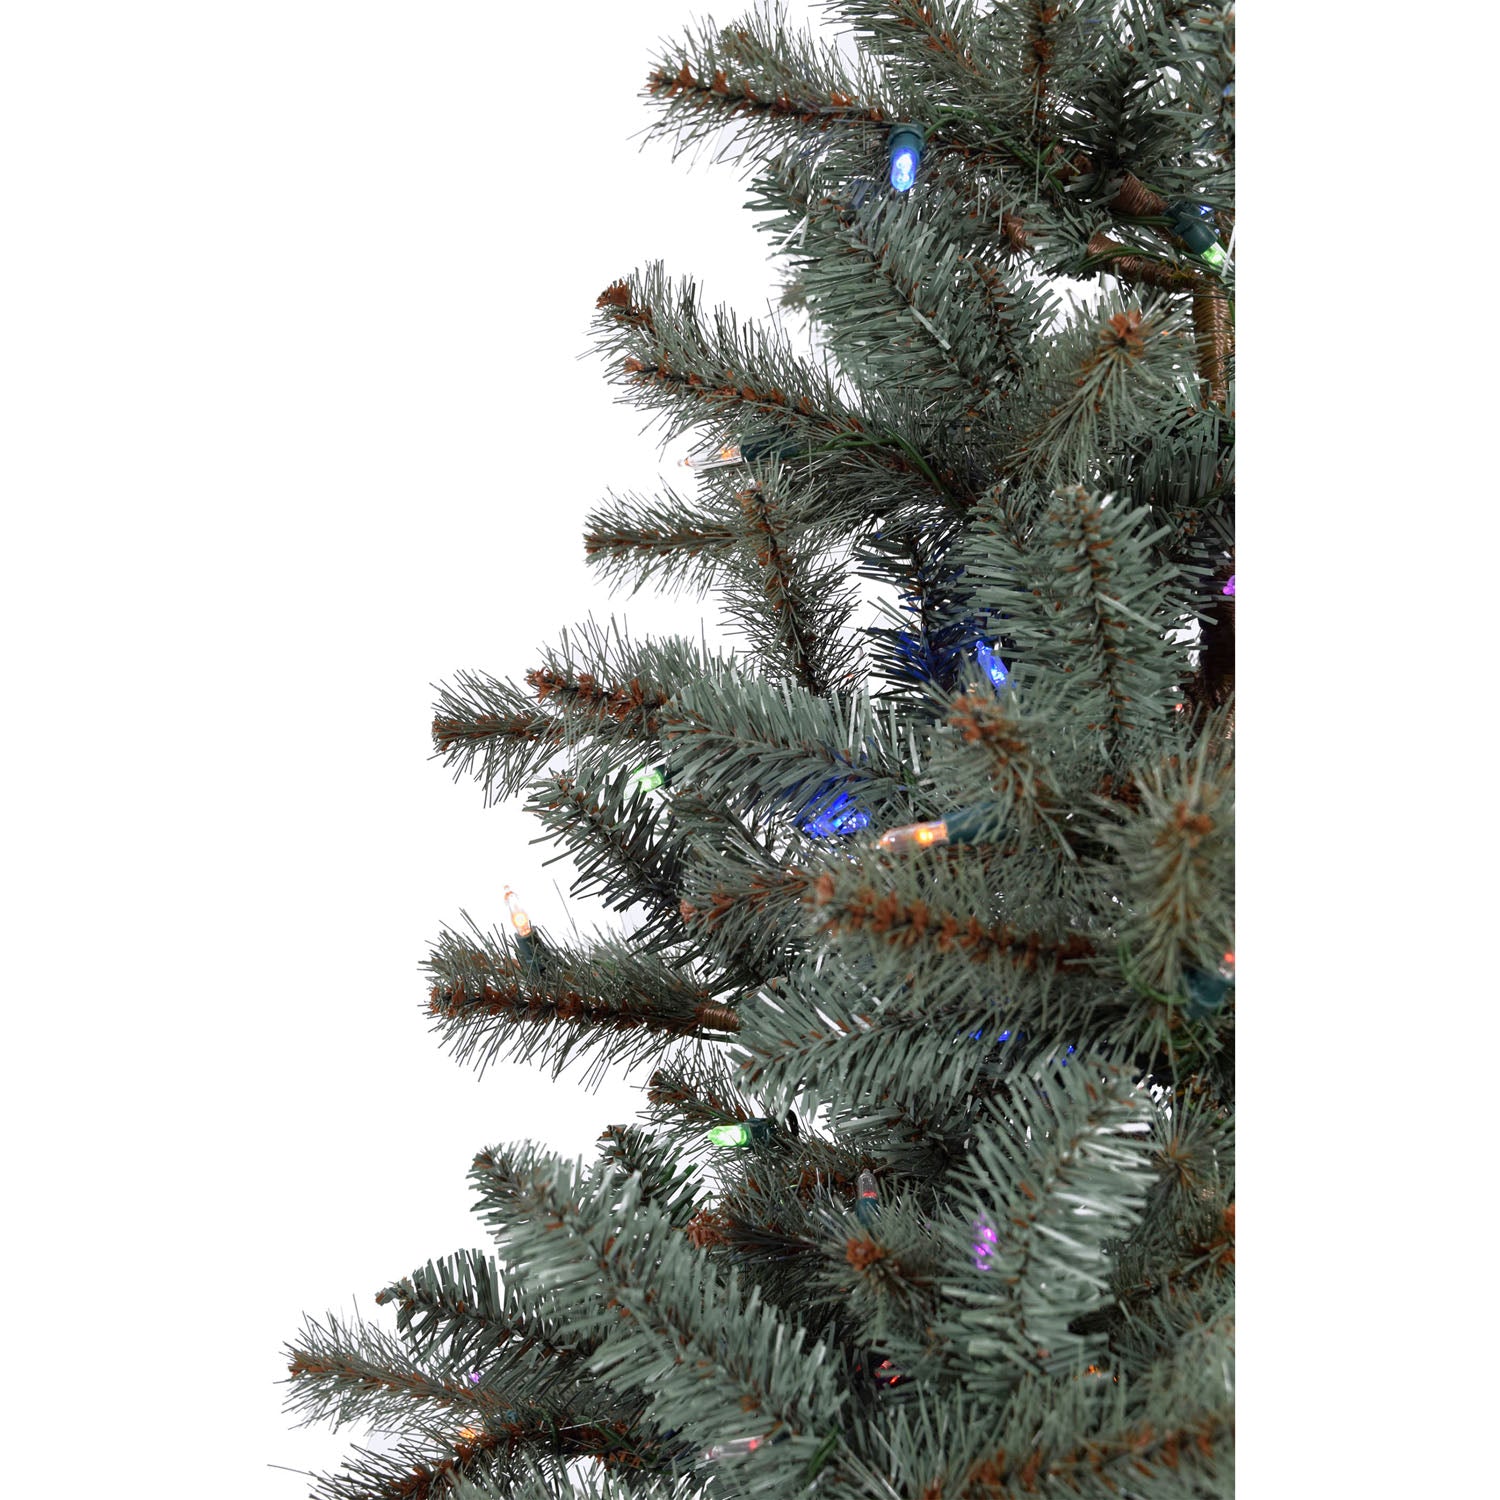 Fraser Hill Farm -  3-Ft. Heritage Pine Artificial Tree with Burlap Base and Multi-Colored LED String Lights